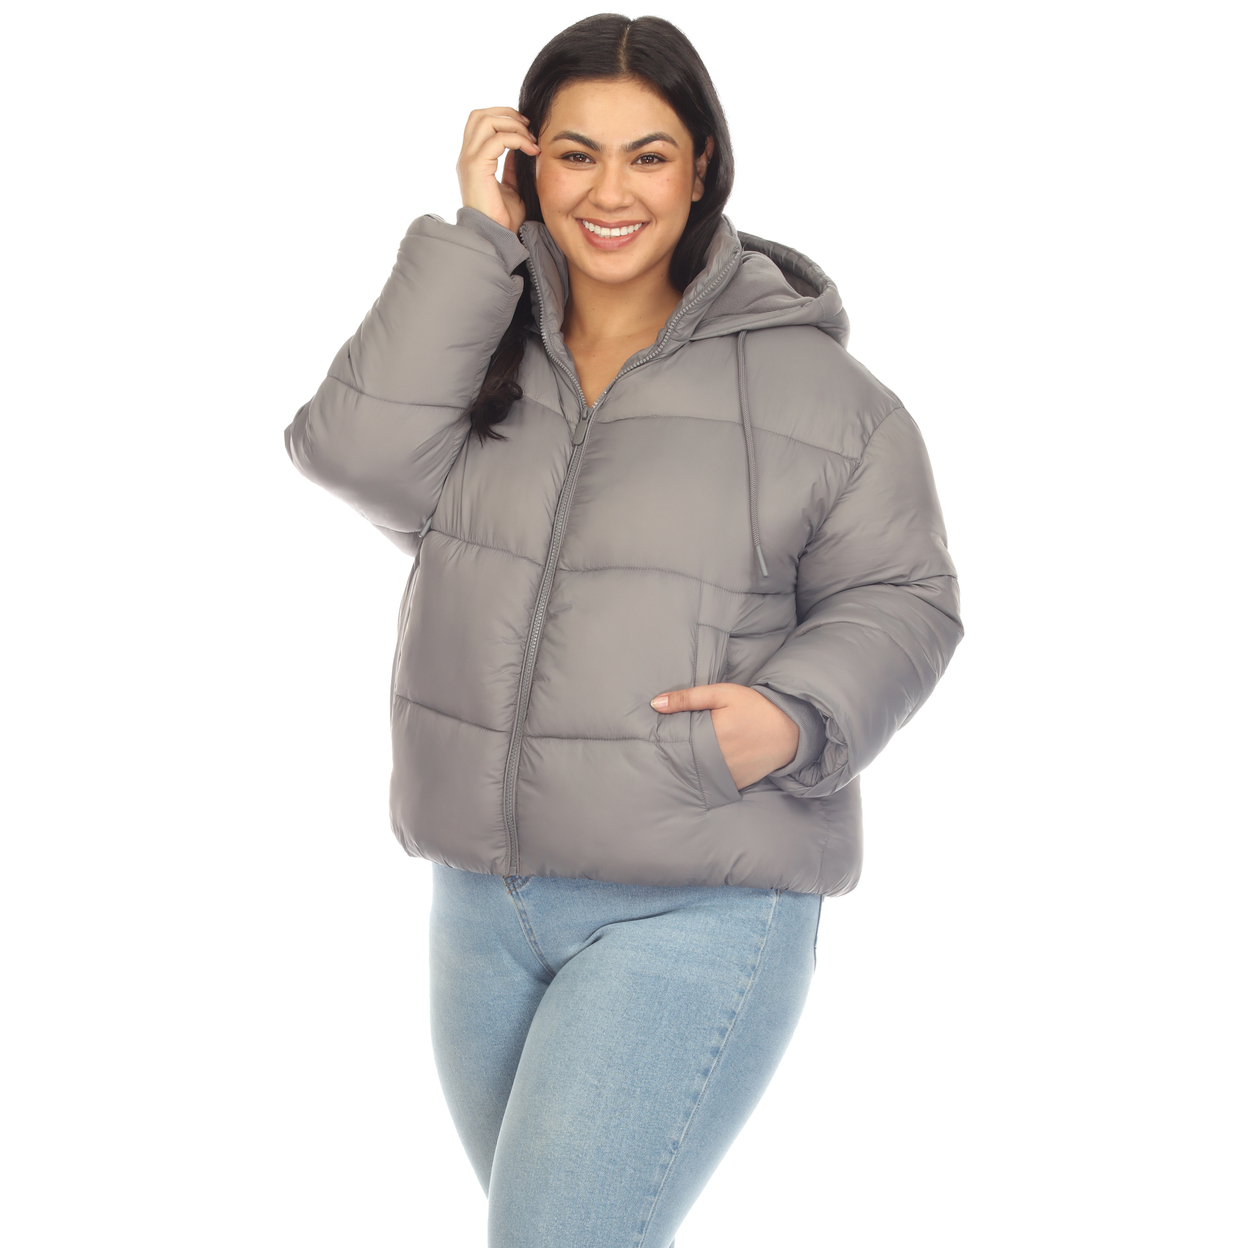 White Mark Women's Zip Hooded Puffer Jacket With Pockets - Gray, 1x